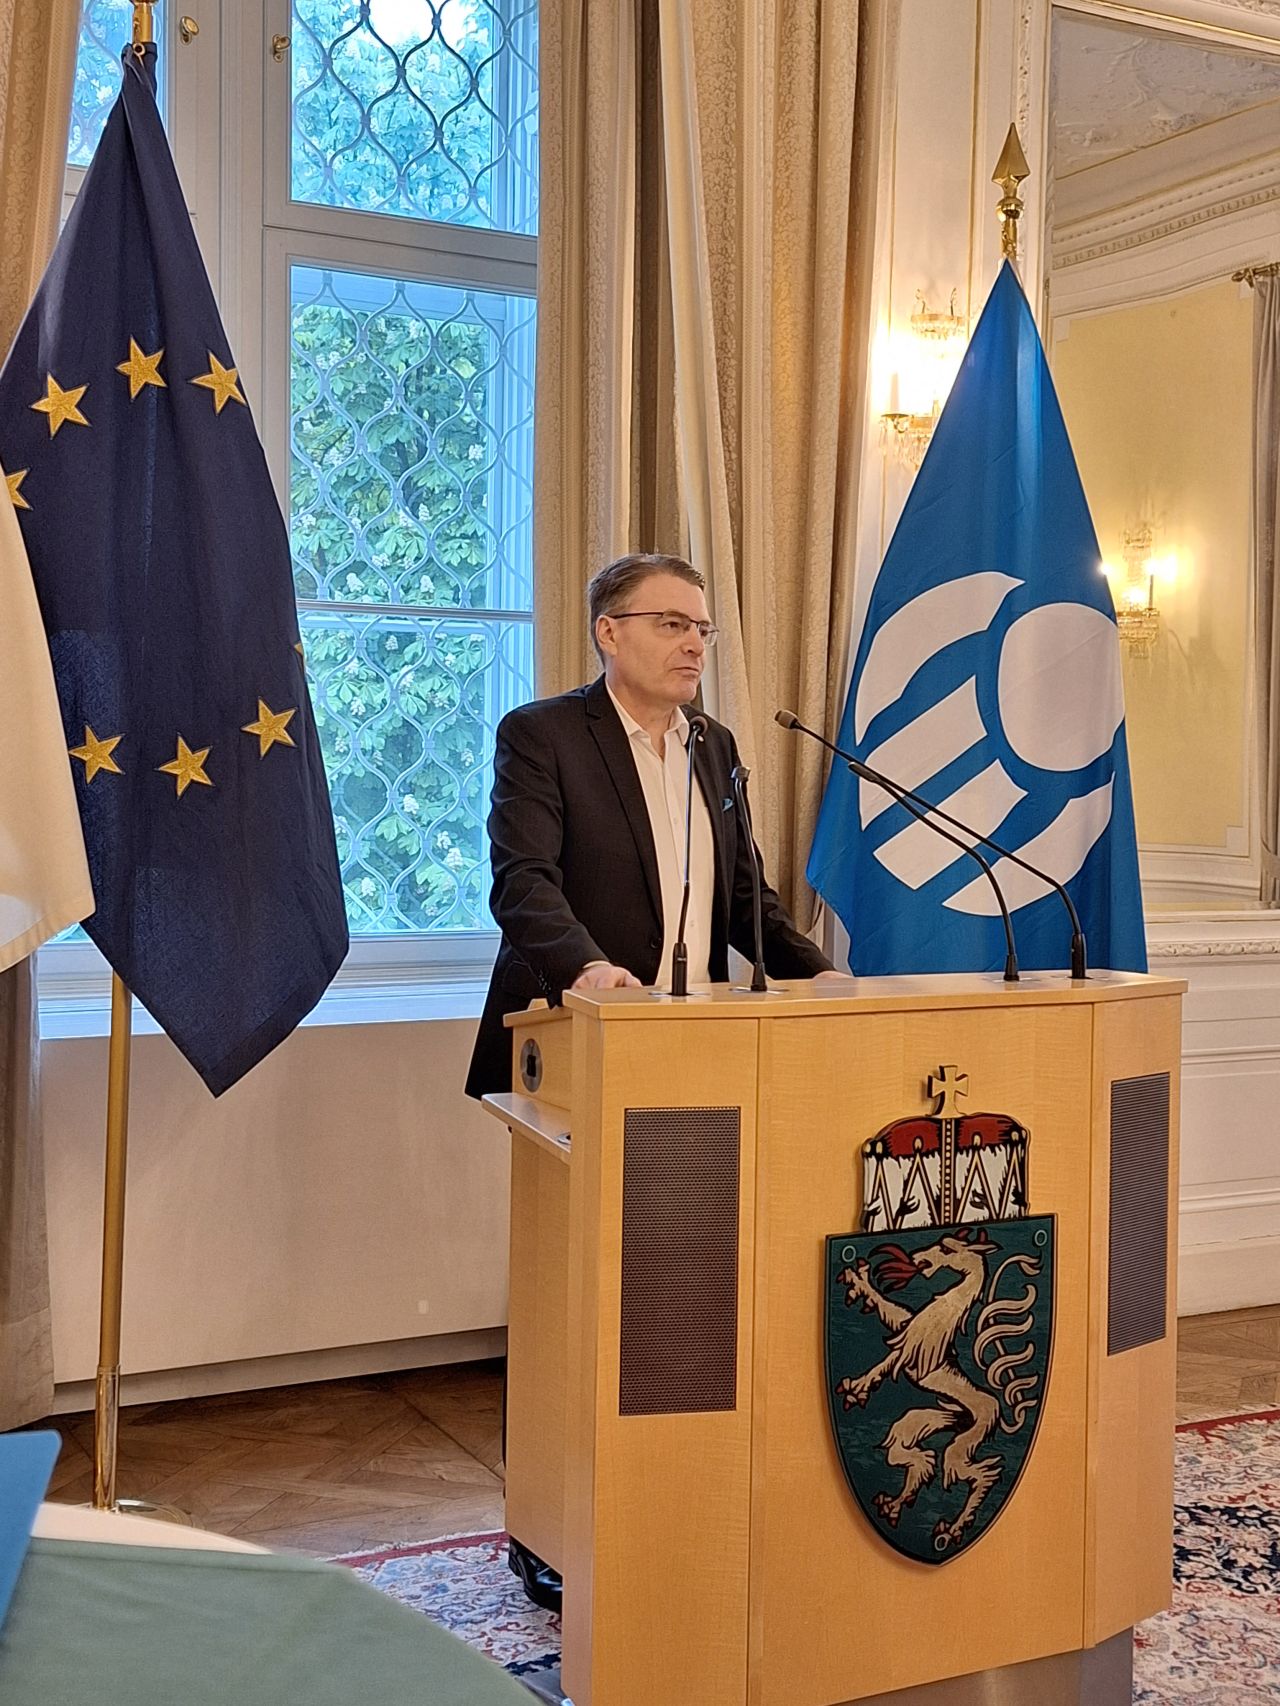 IOI President, Chris Field PSM, providing the commemoration speech for the presentation of the Golden Order of Merit to former IOI Secretary General, Minister Werner Amon.